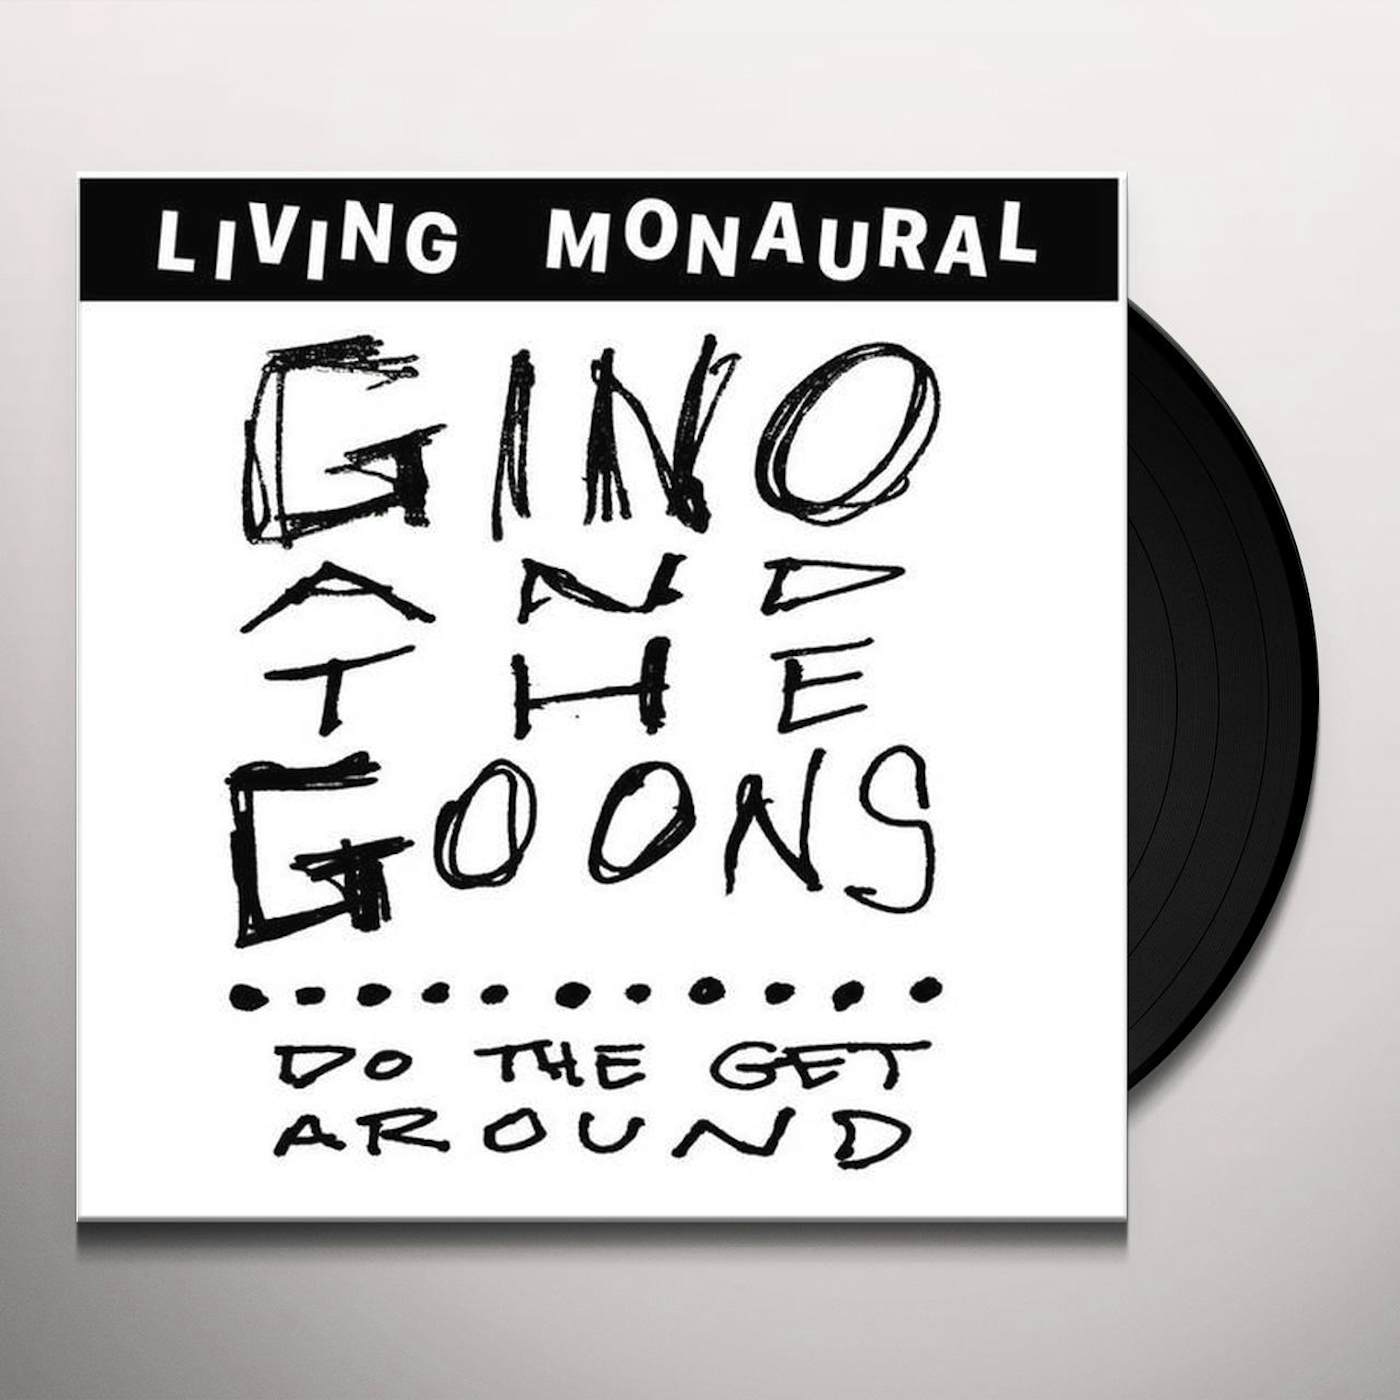 Gino and the Goons Do The Get Around Vinyl Record